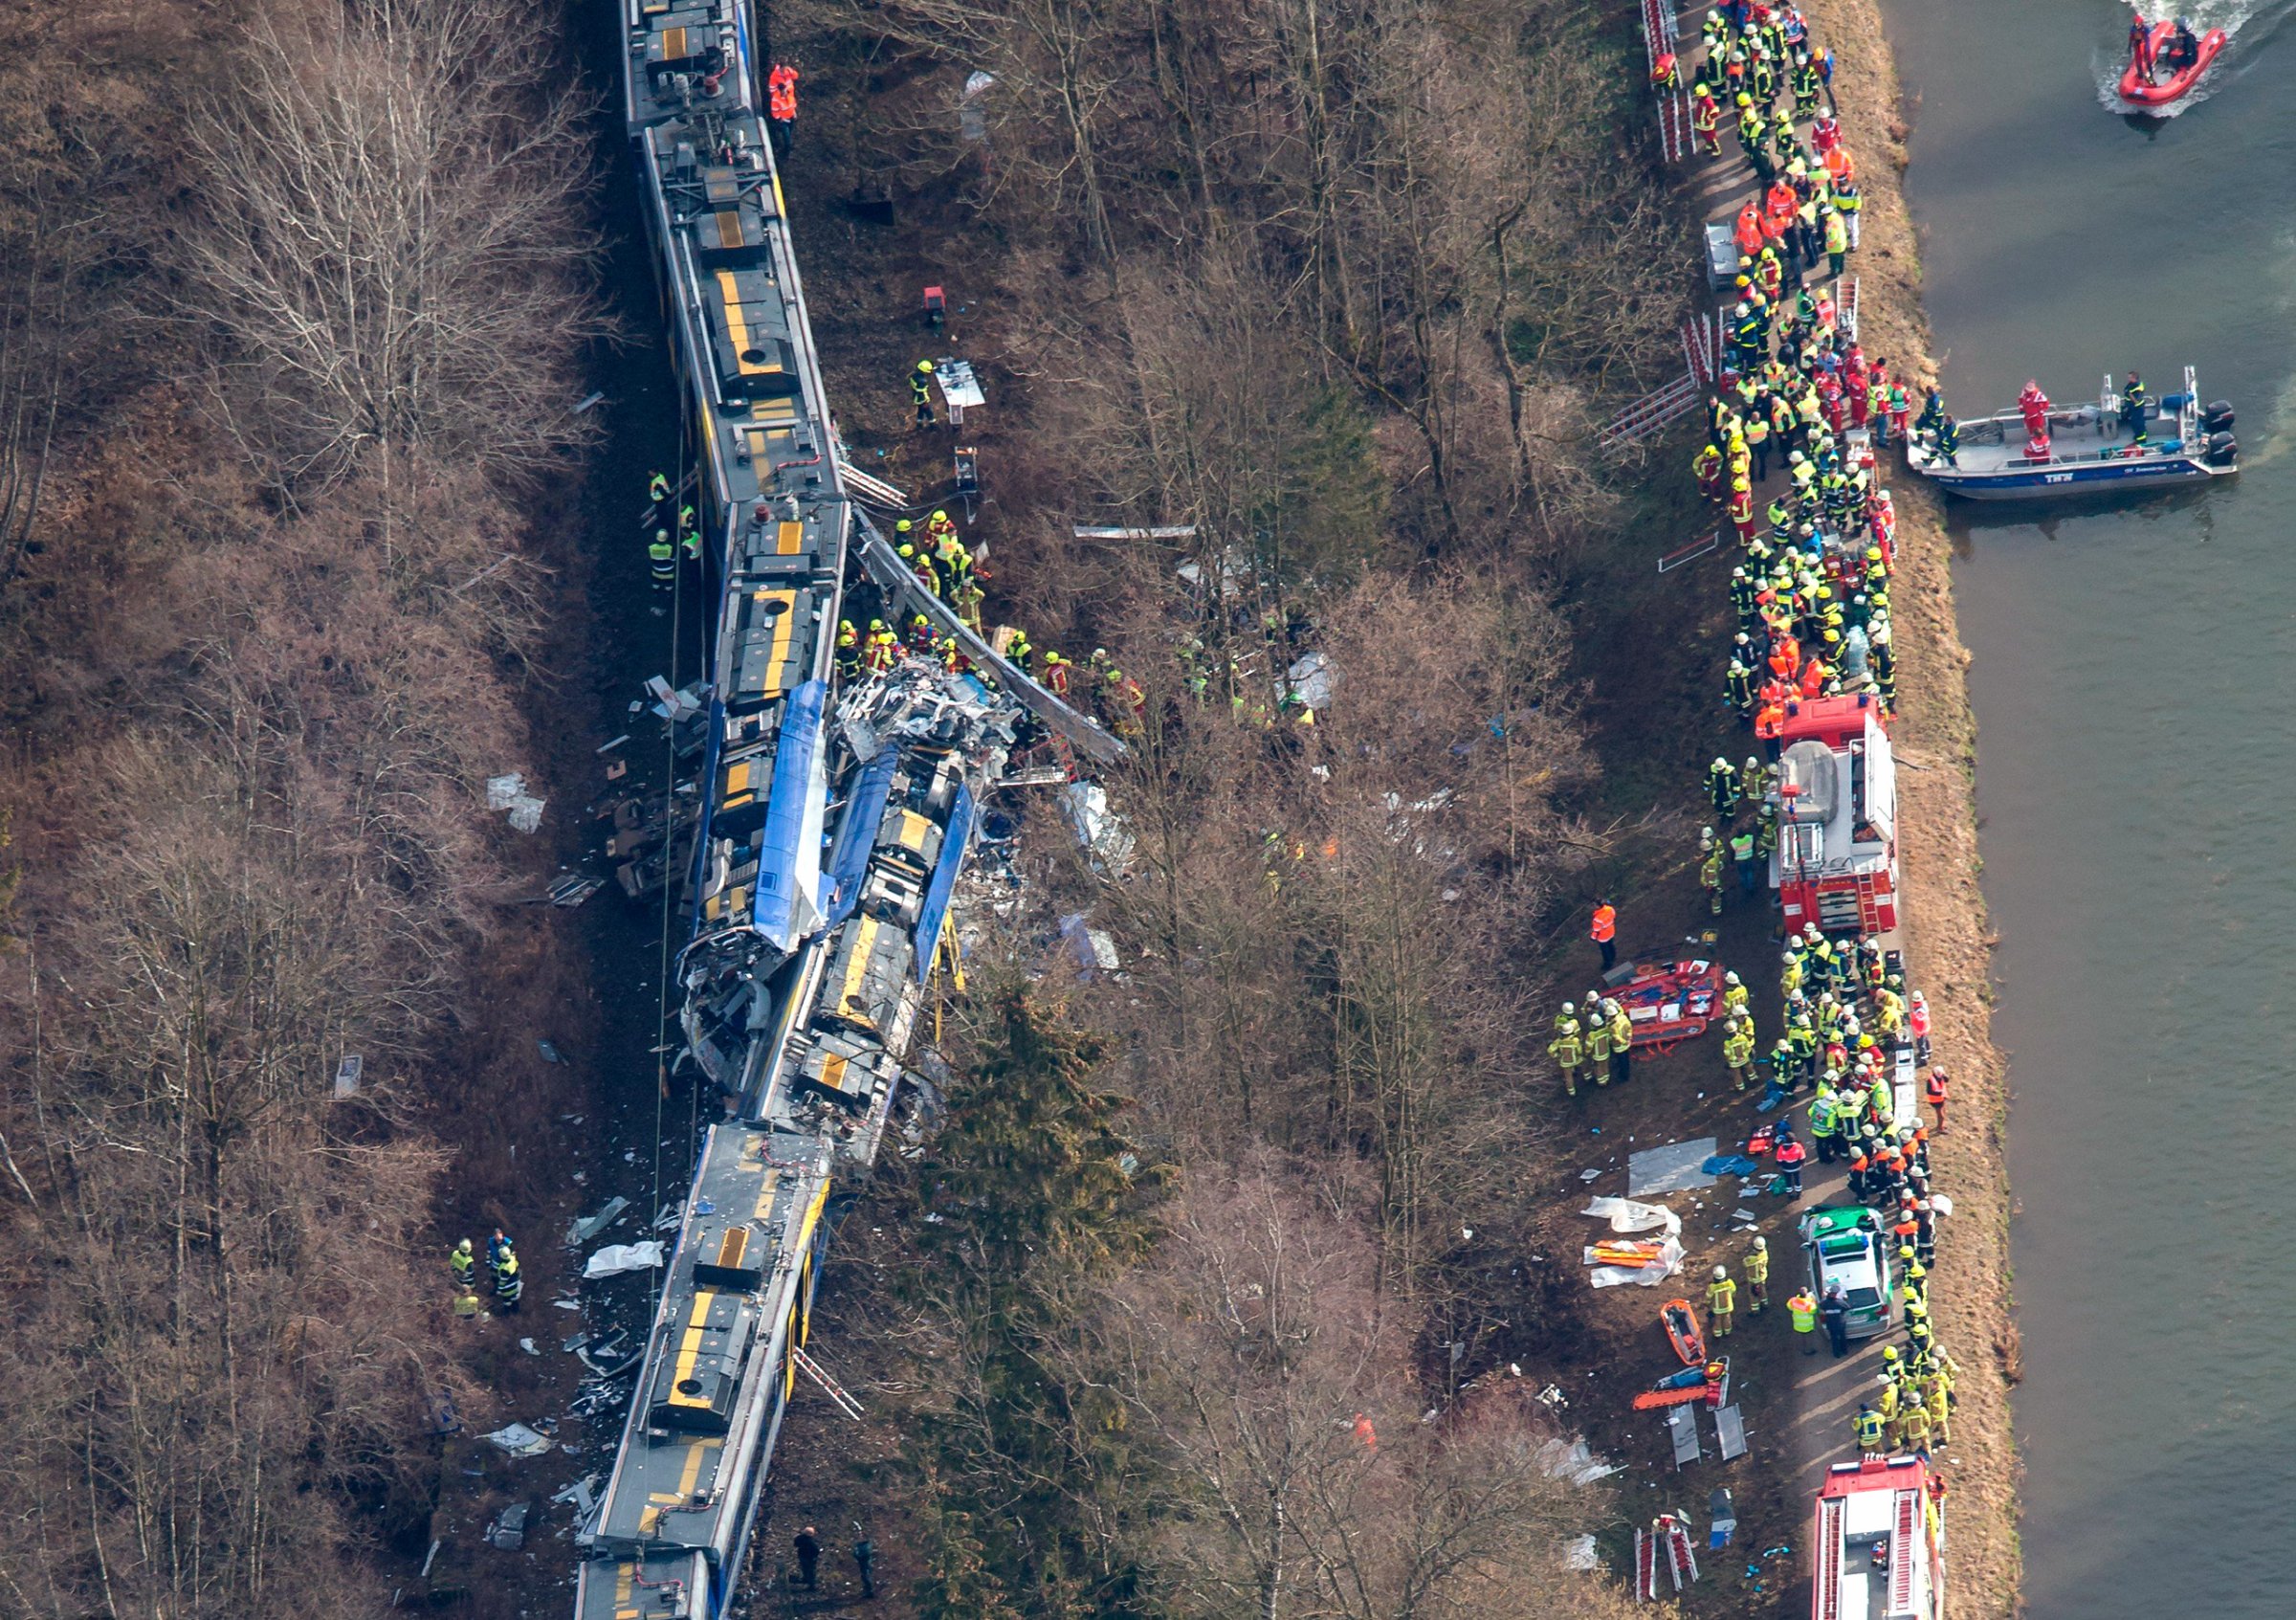 An aerial view of rescuers working at the site of a train accident near Bad Aibling, Germany, Feb. 9, 2016.